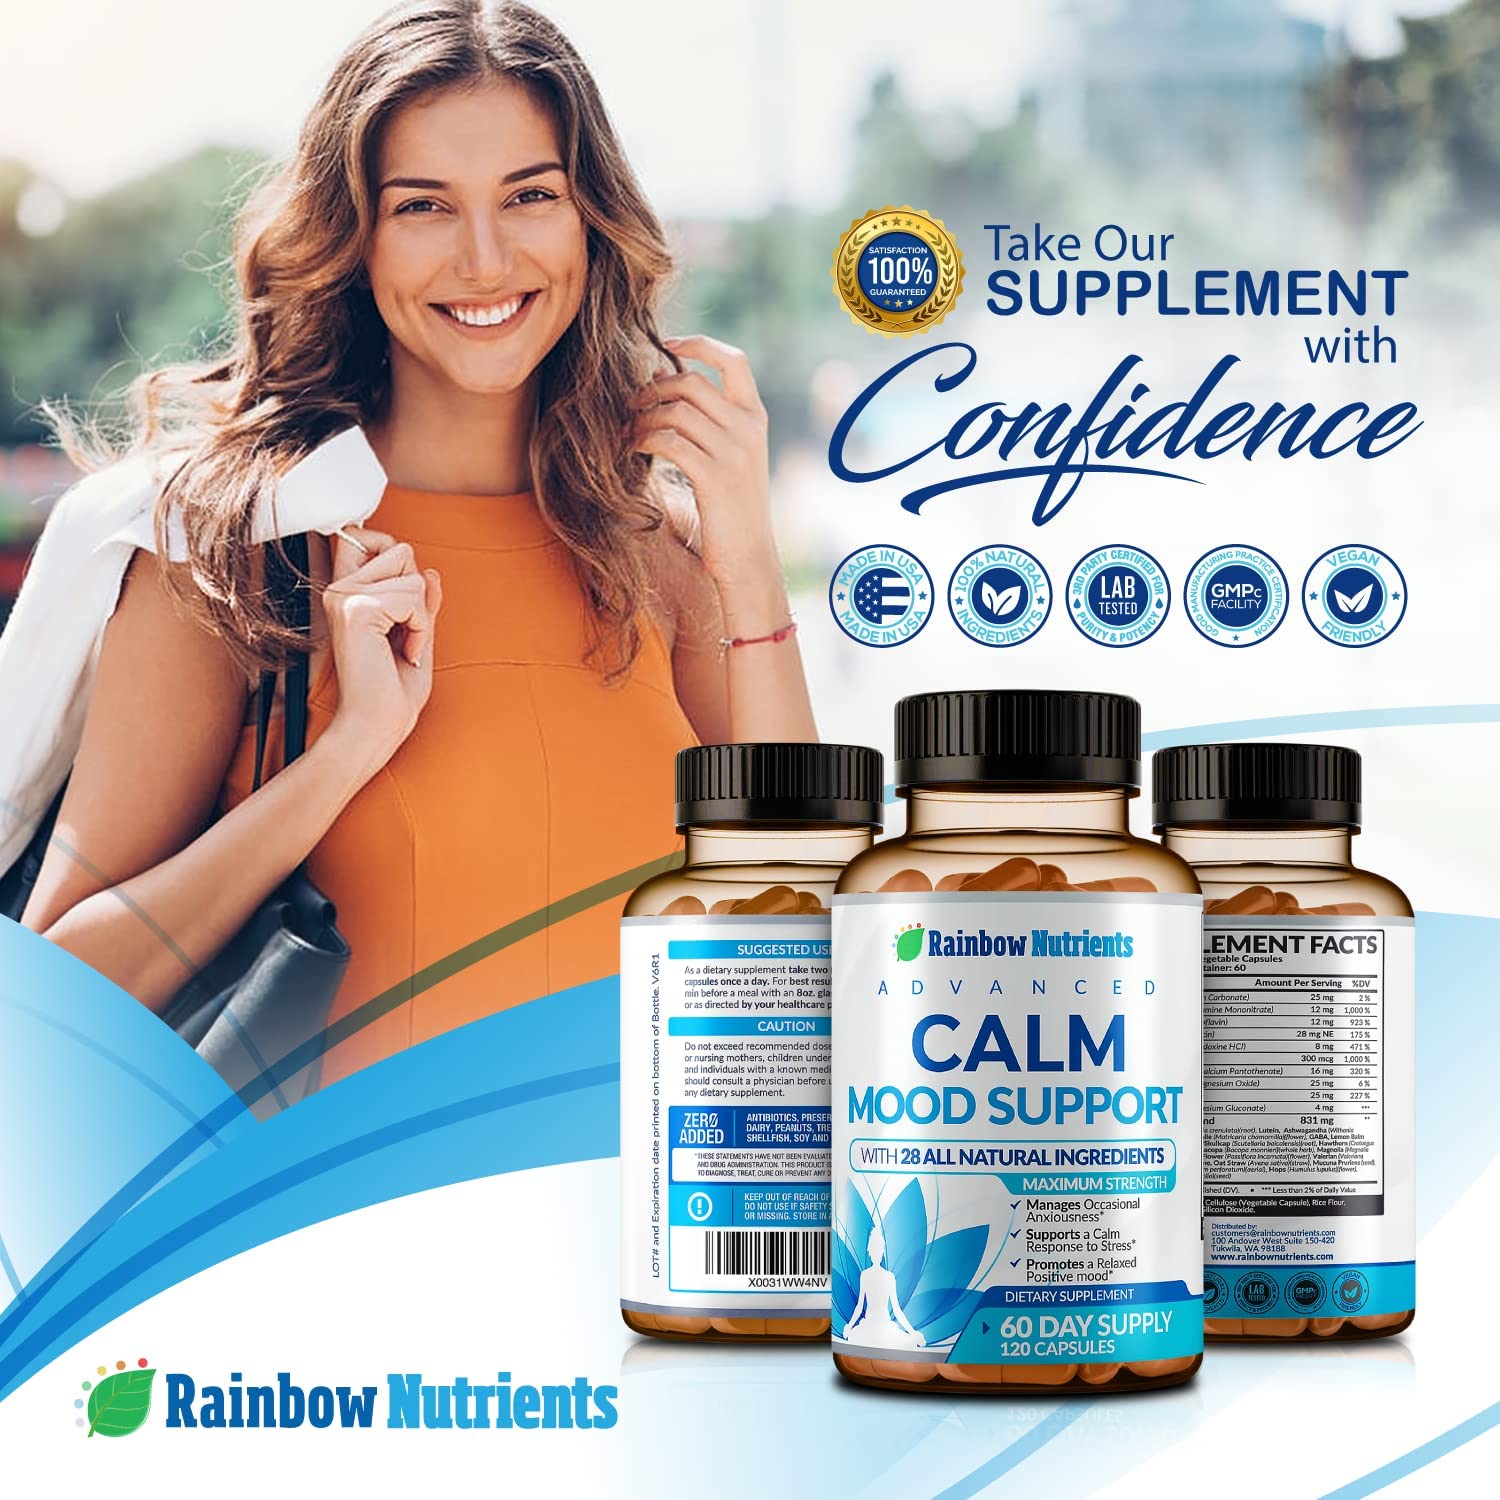 Take our supplement with confidence